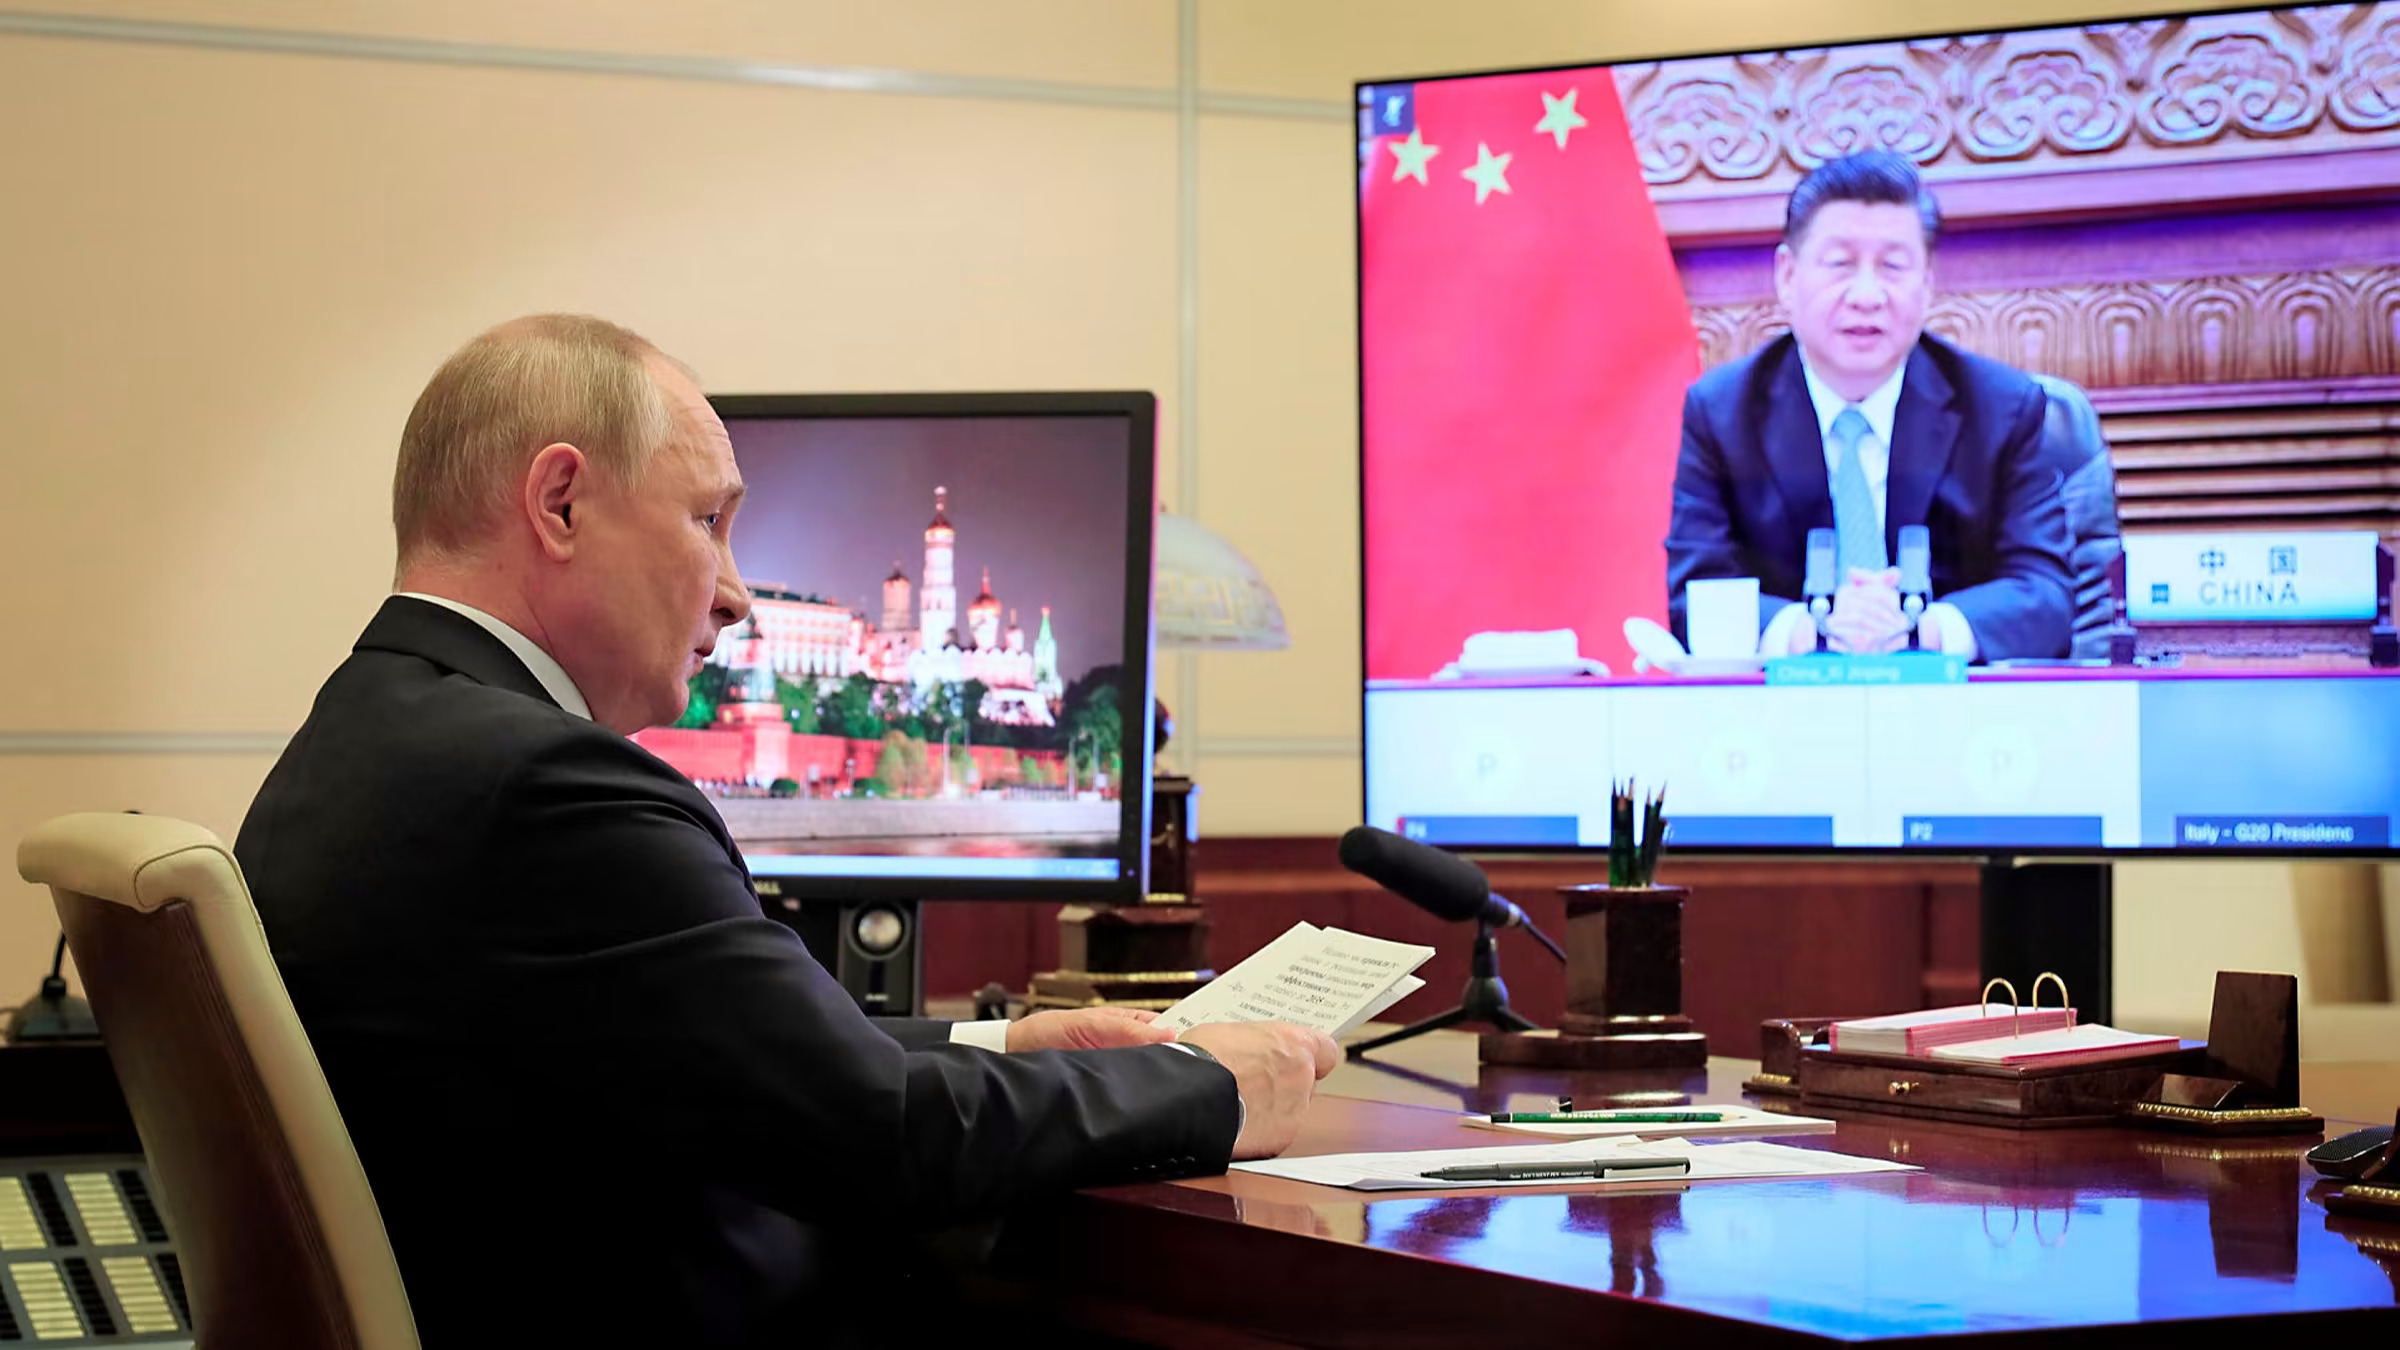 Chinese News Media Narratives on the Ukraine-Russia Crisis